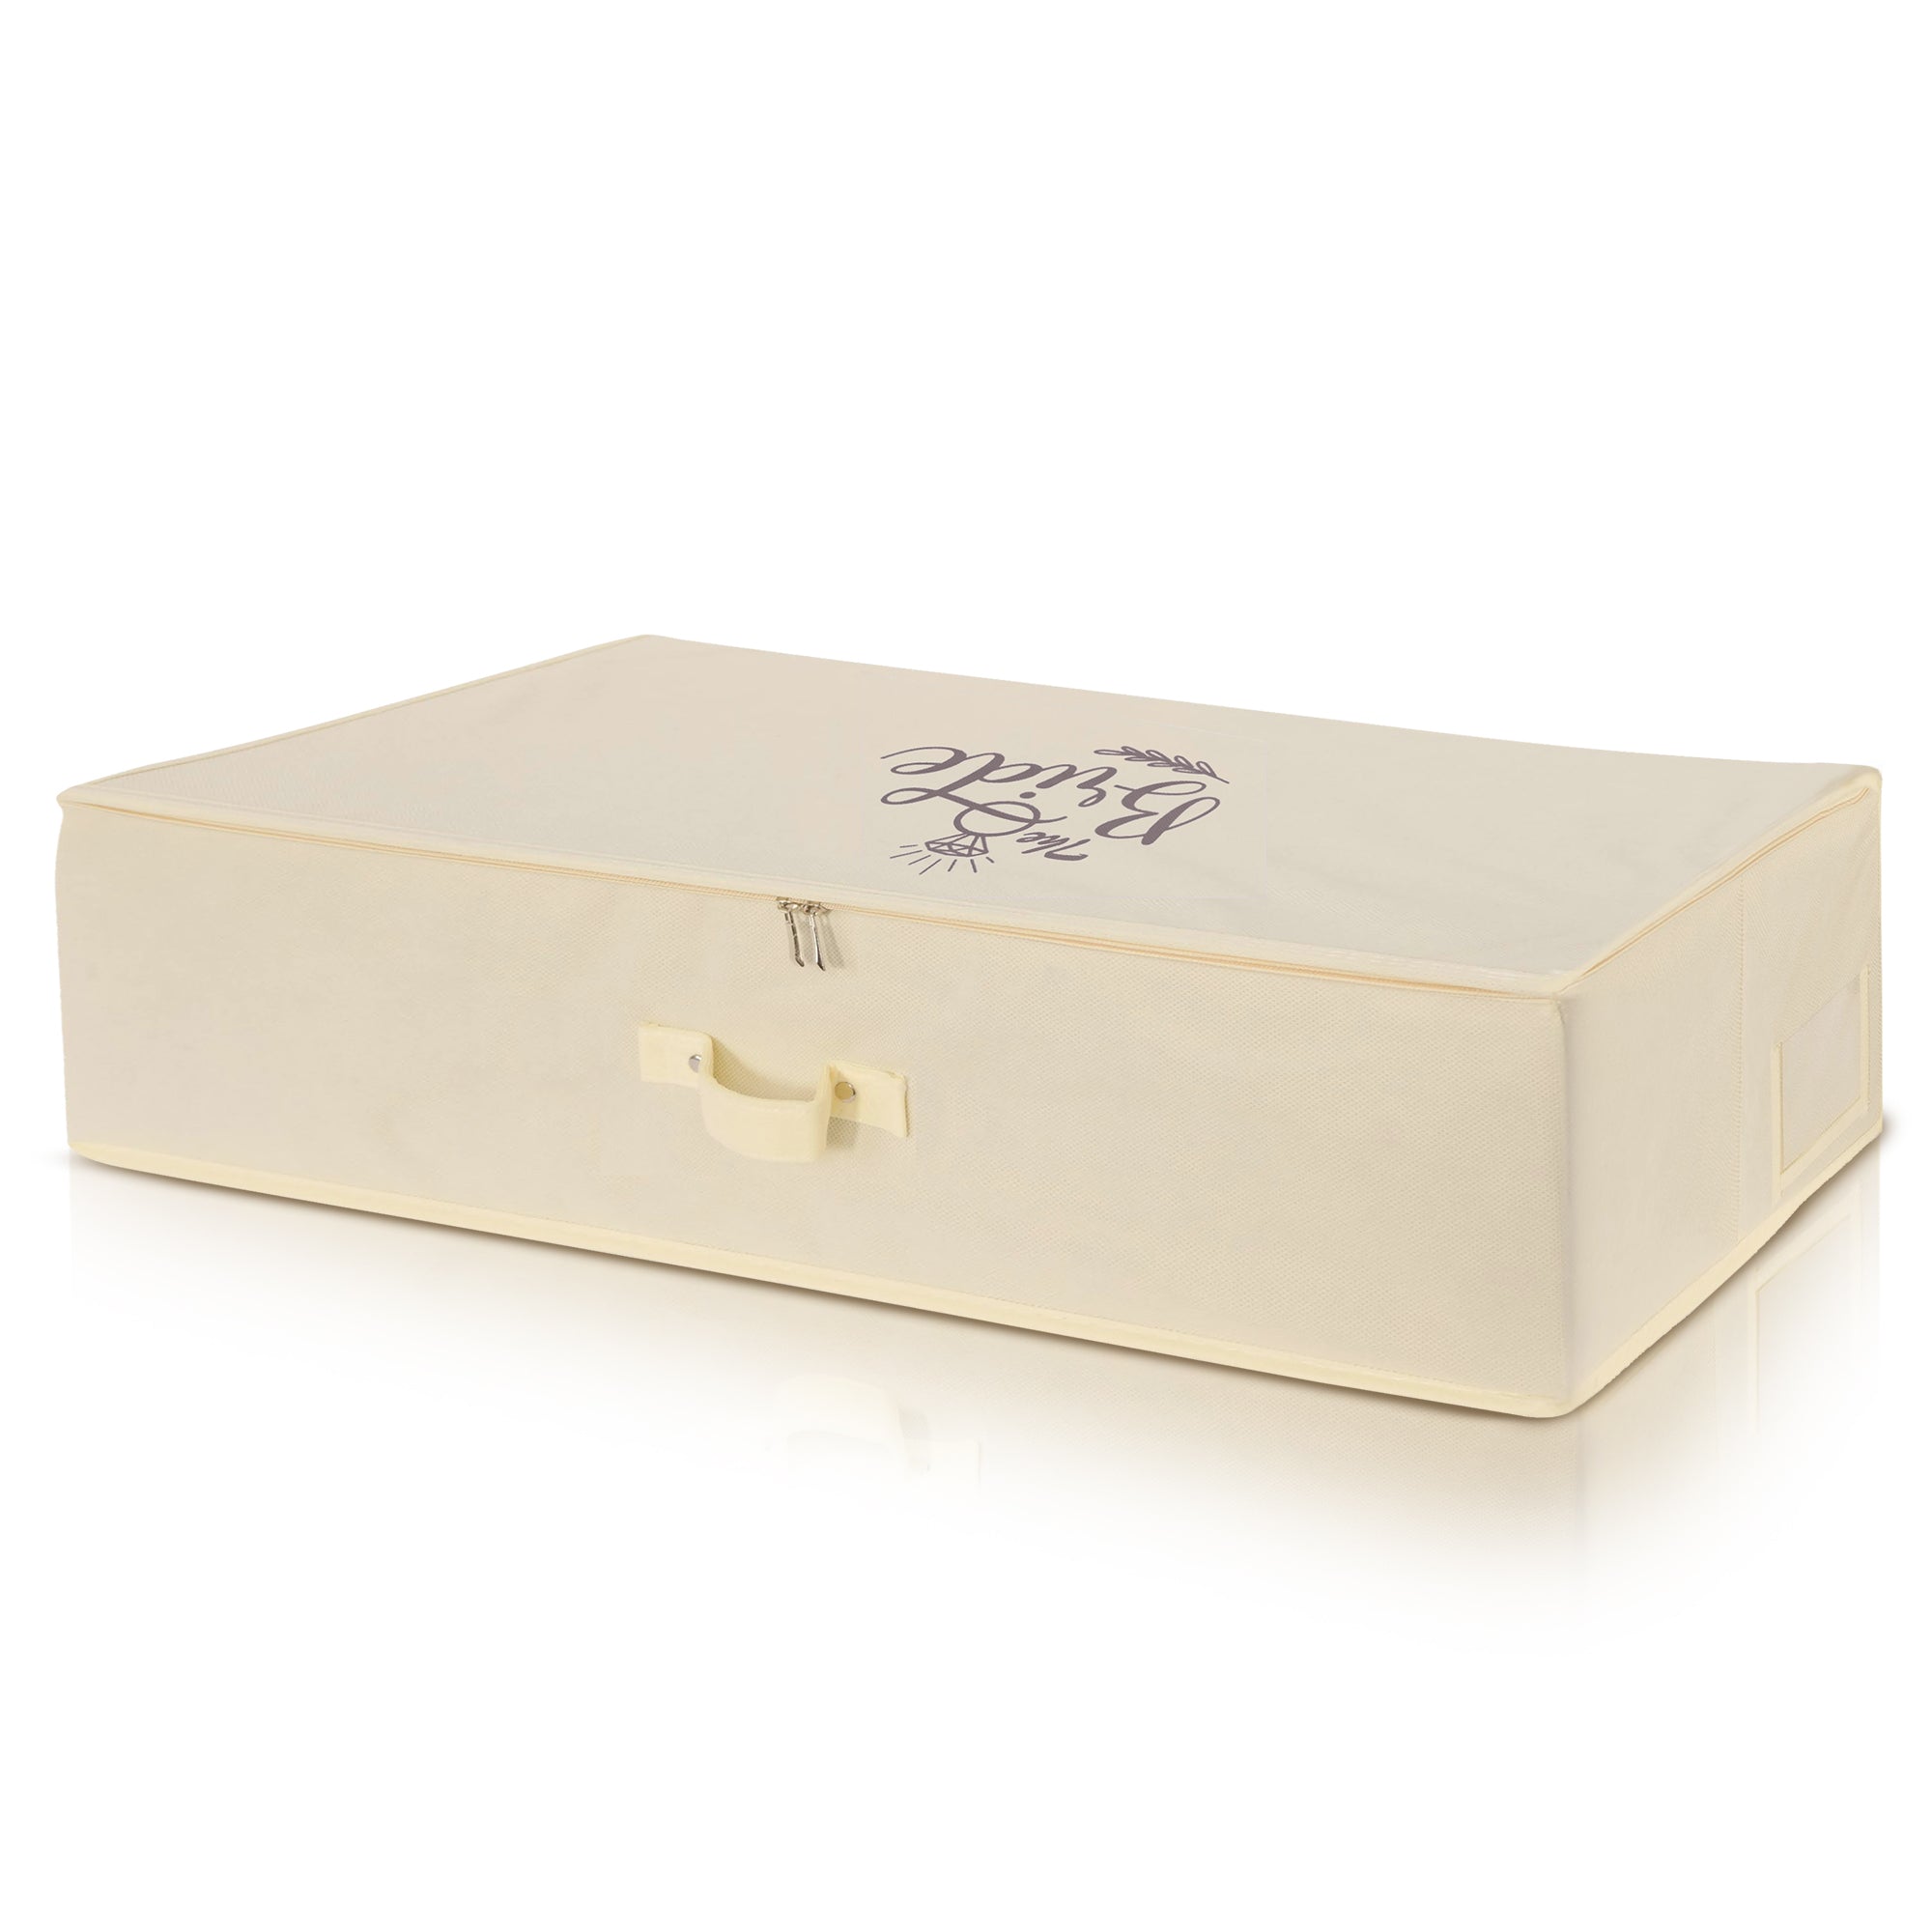 Printed with Your Logo Wedding Dress Travel Storage Boxes